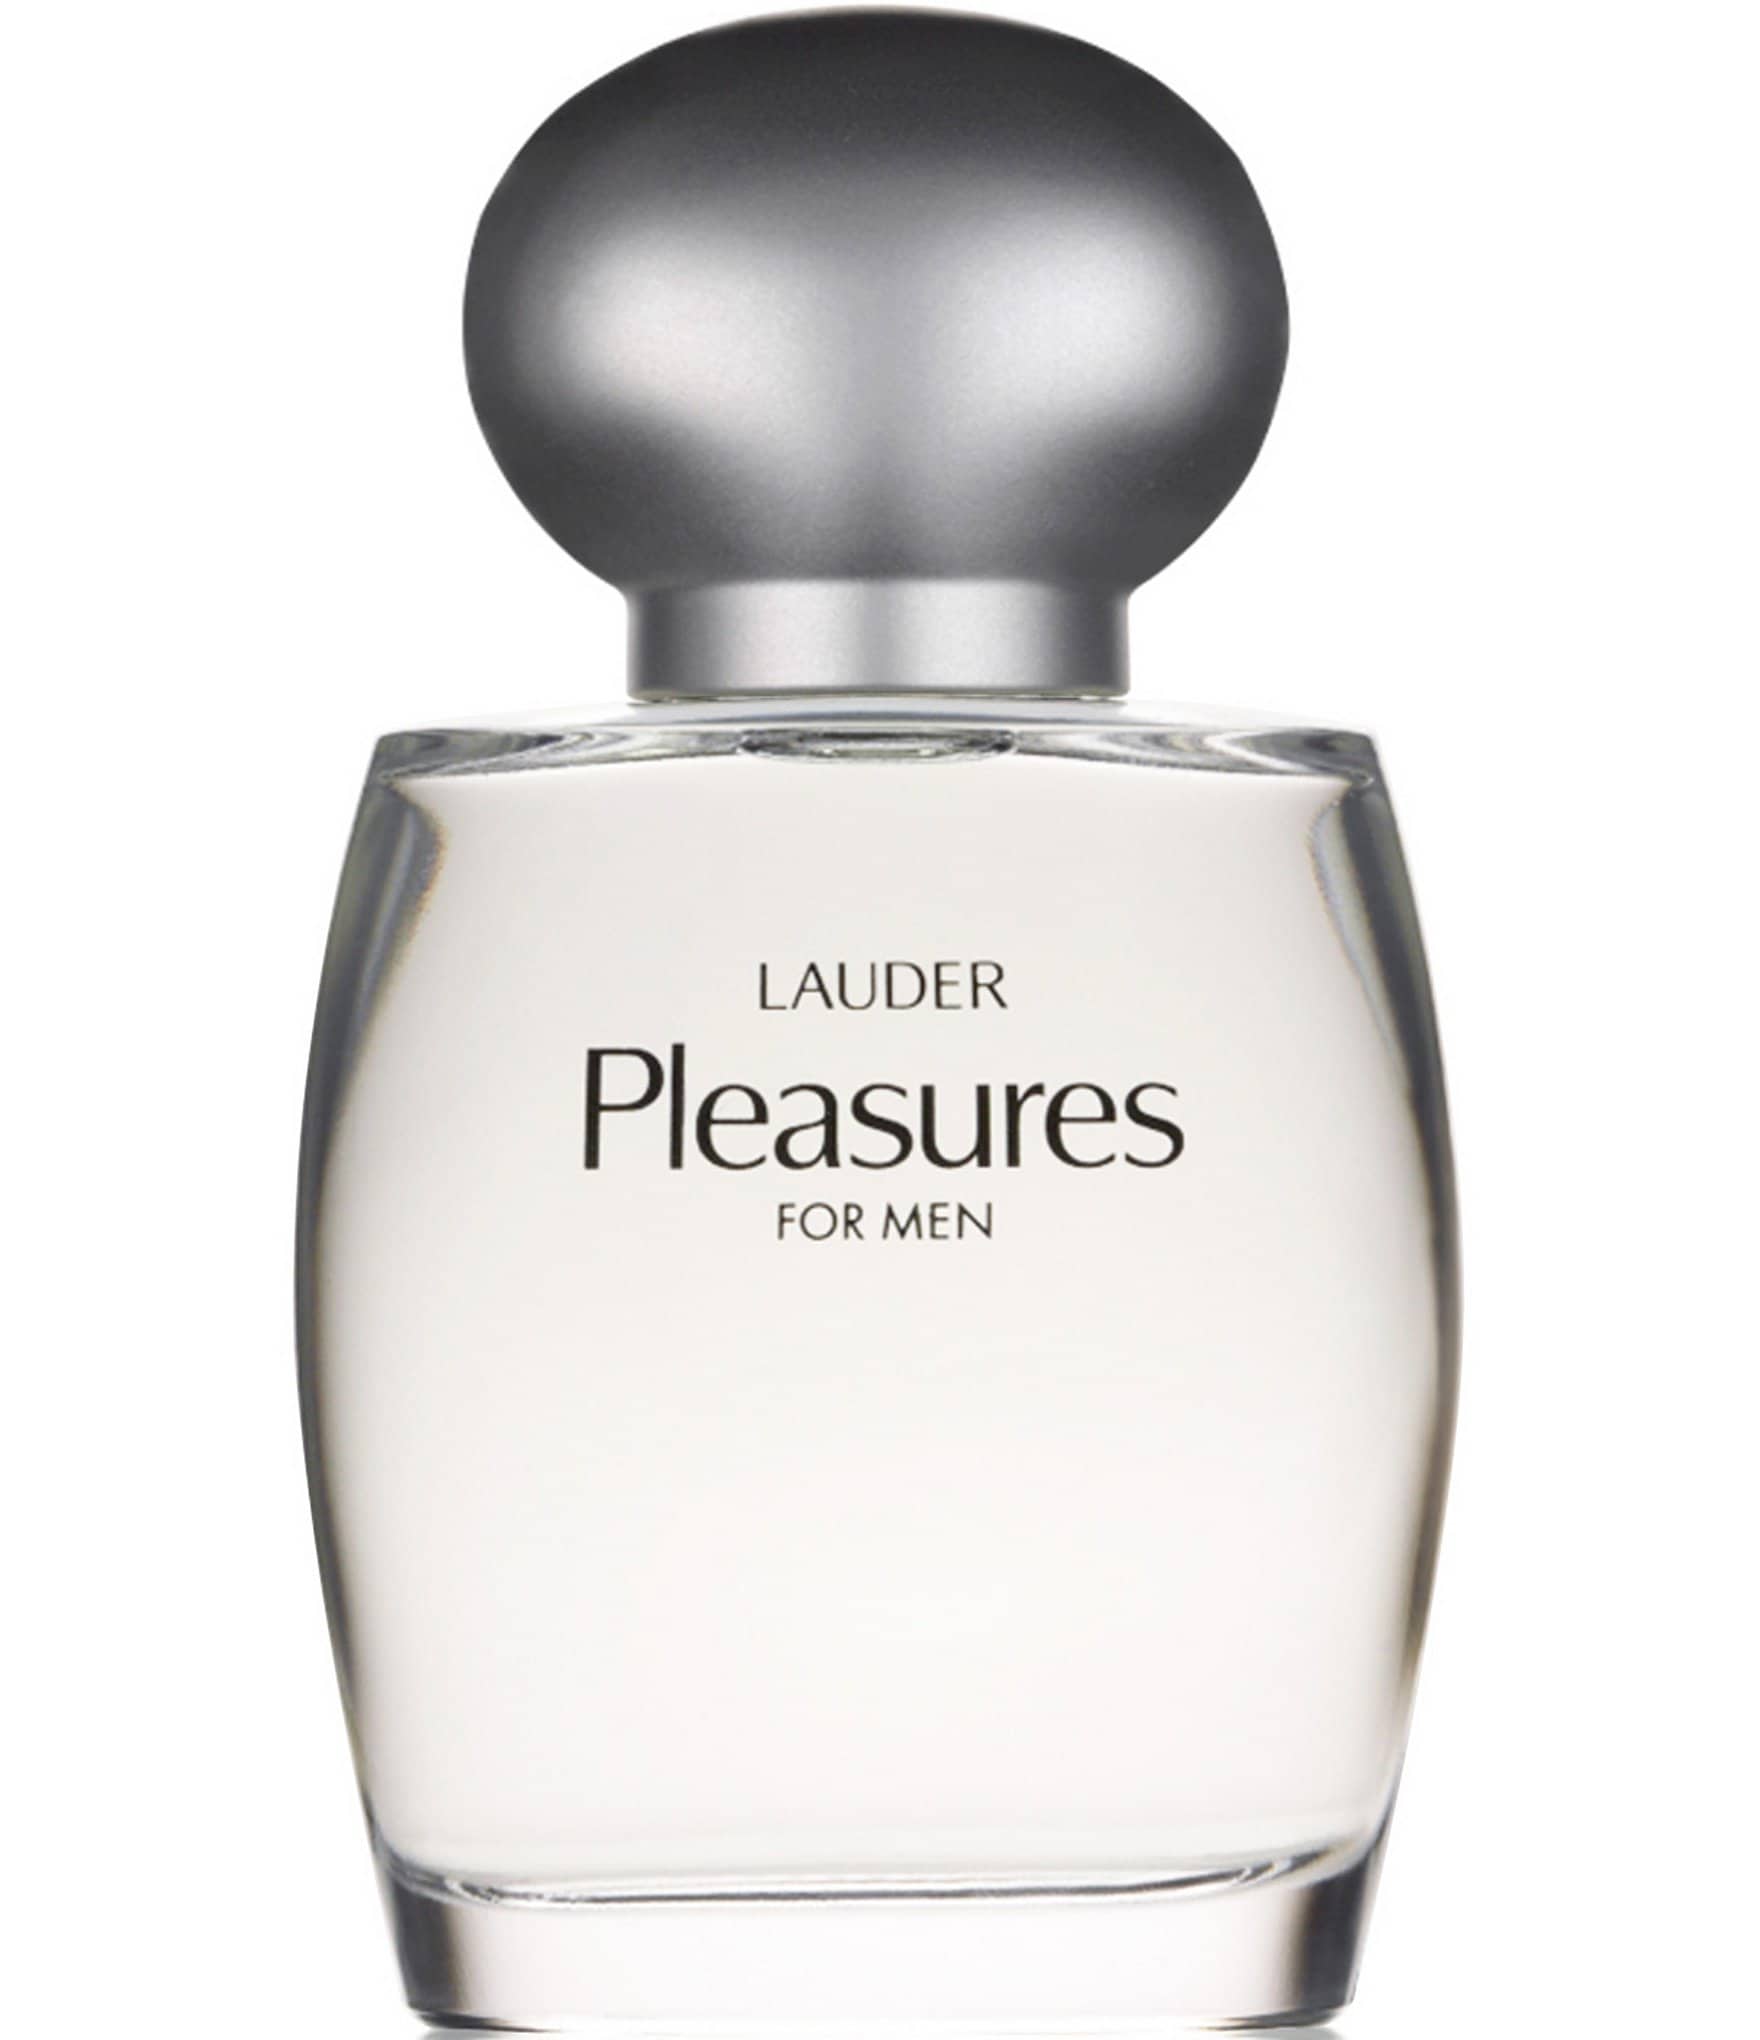 louis cologne for men lure her